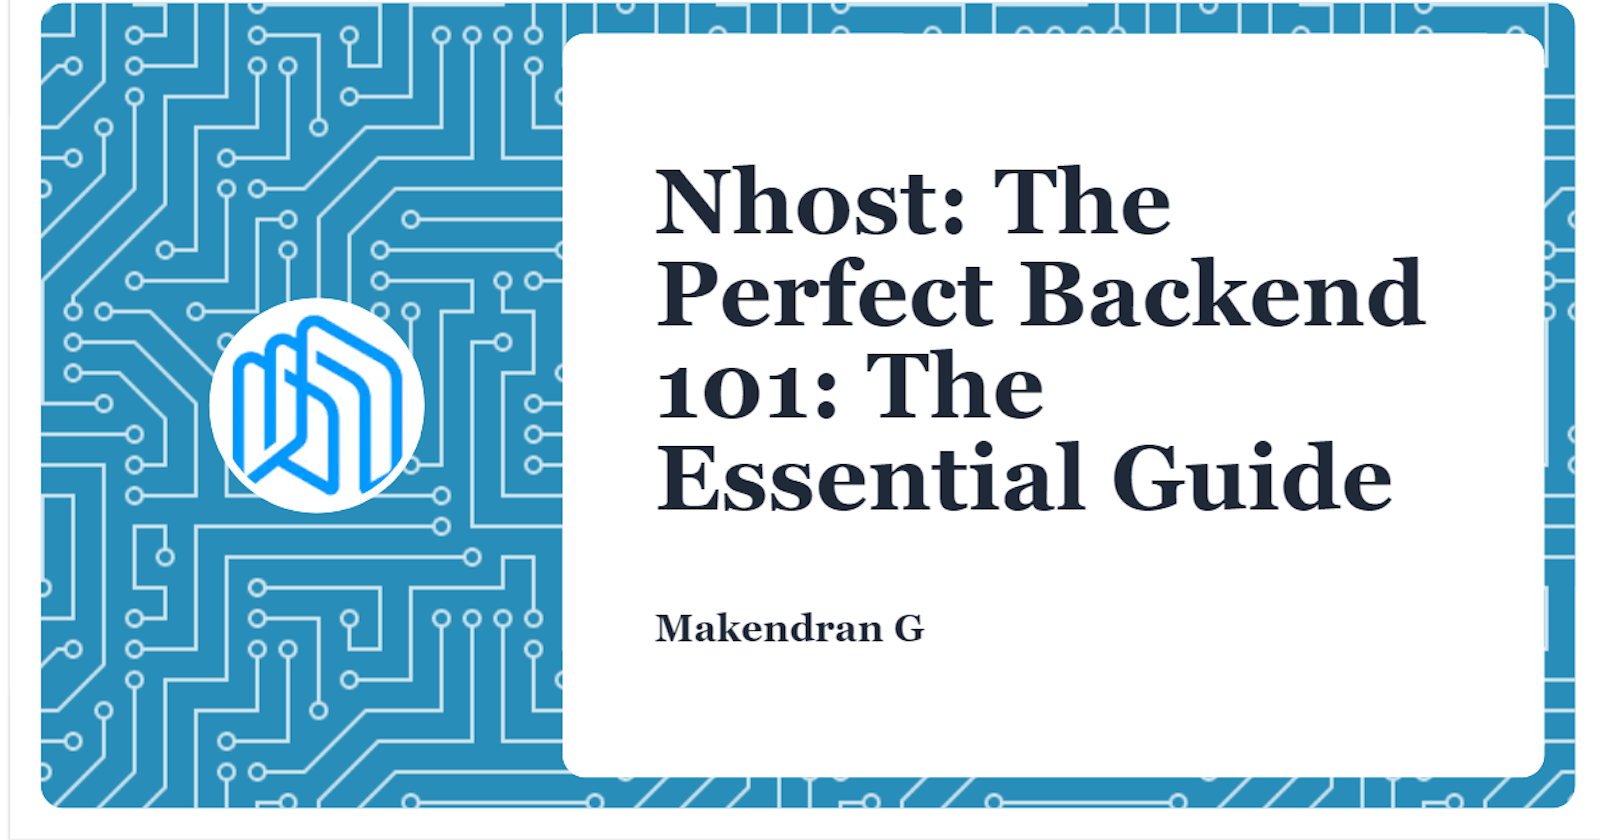 Nhost: The Perfect Backend 101: The Essential Guide